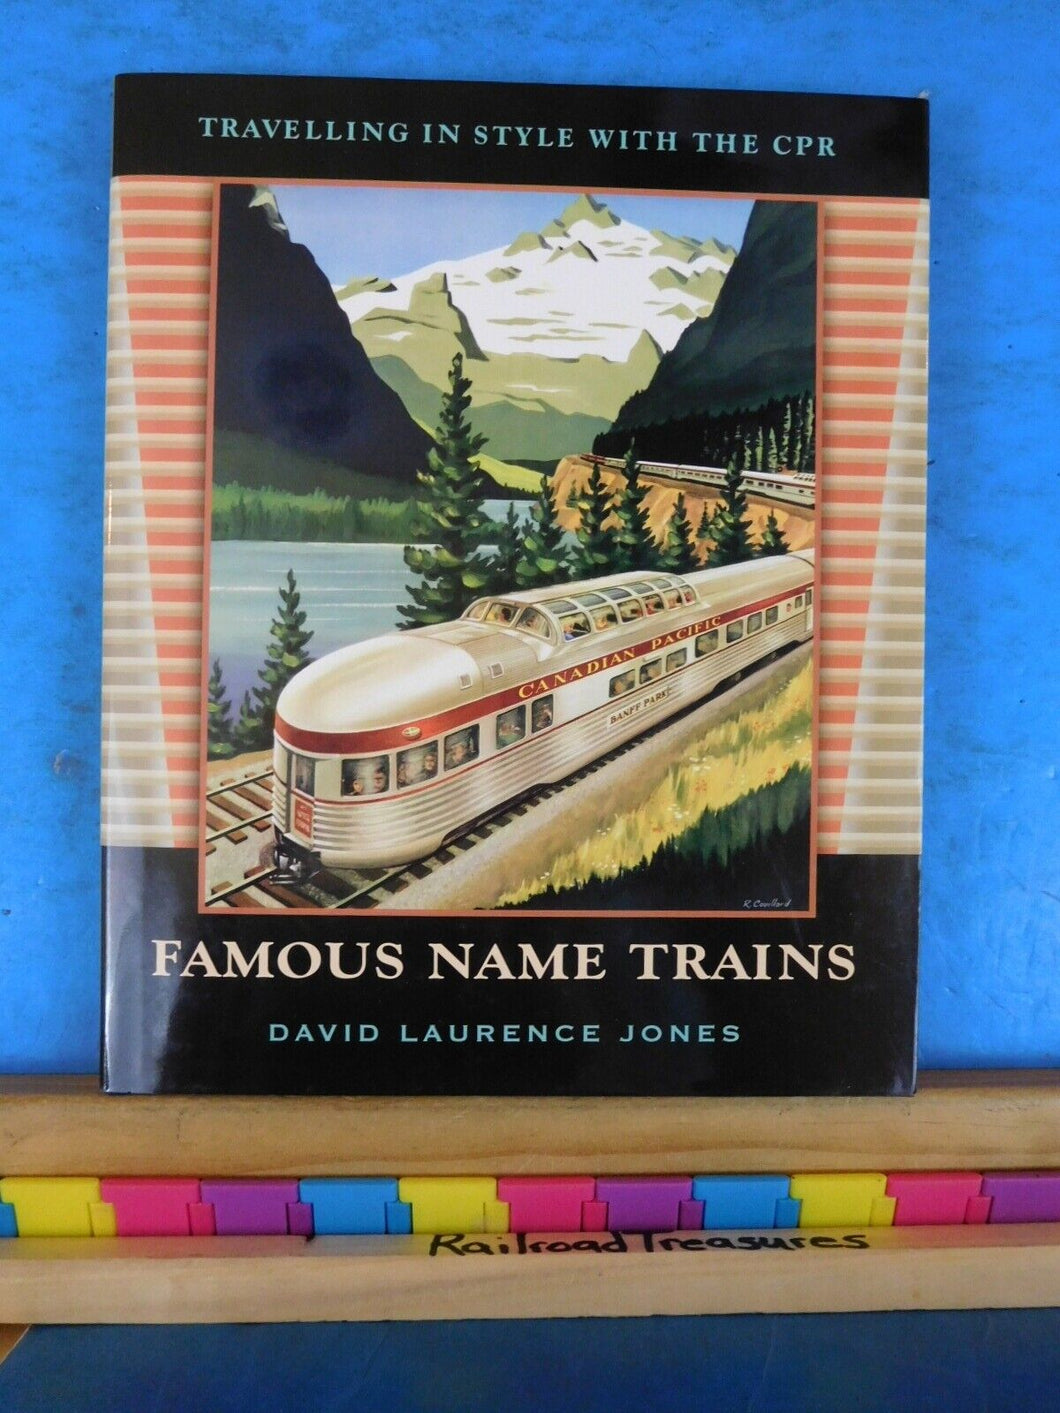 Famous Name Trains by David Laurence Jones Traveling in style with the CPR w DJ